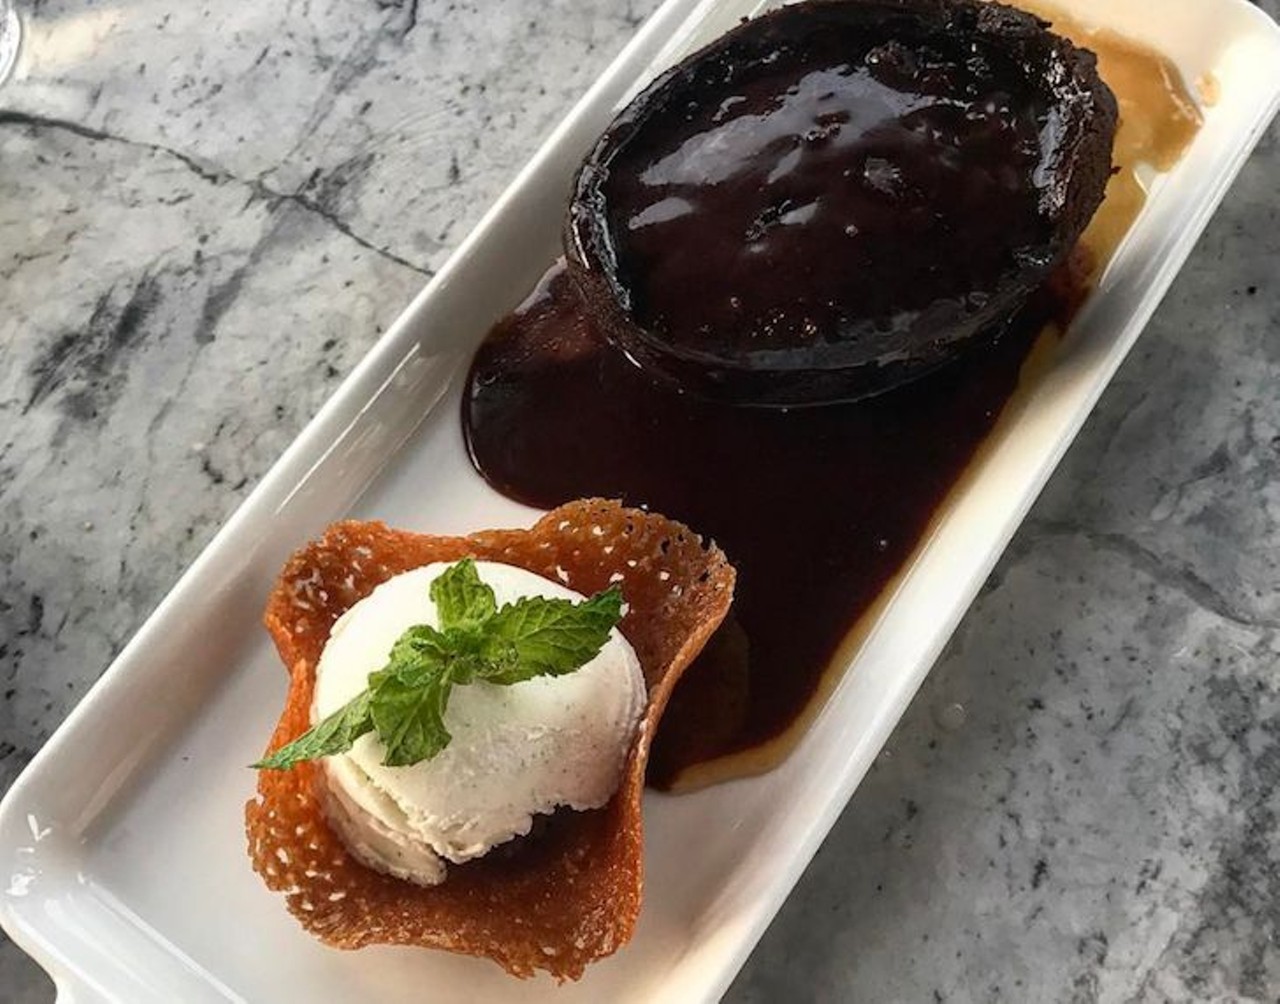 Must-try: Sticky toffee pudding
Photo via winterparkeats/Instagram